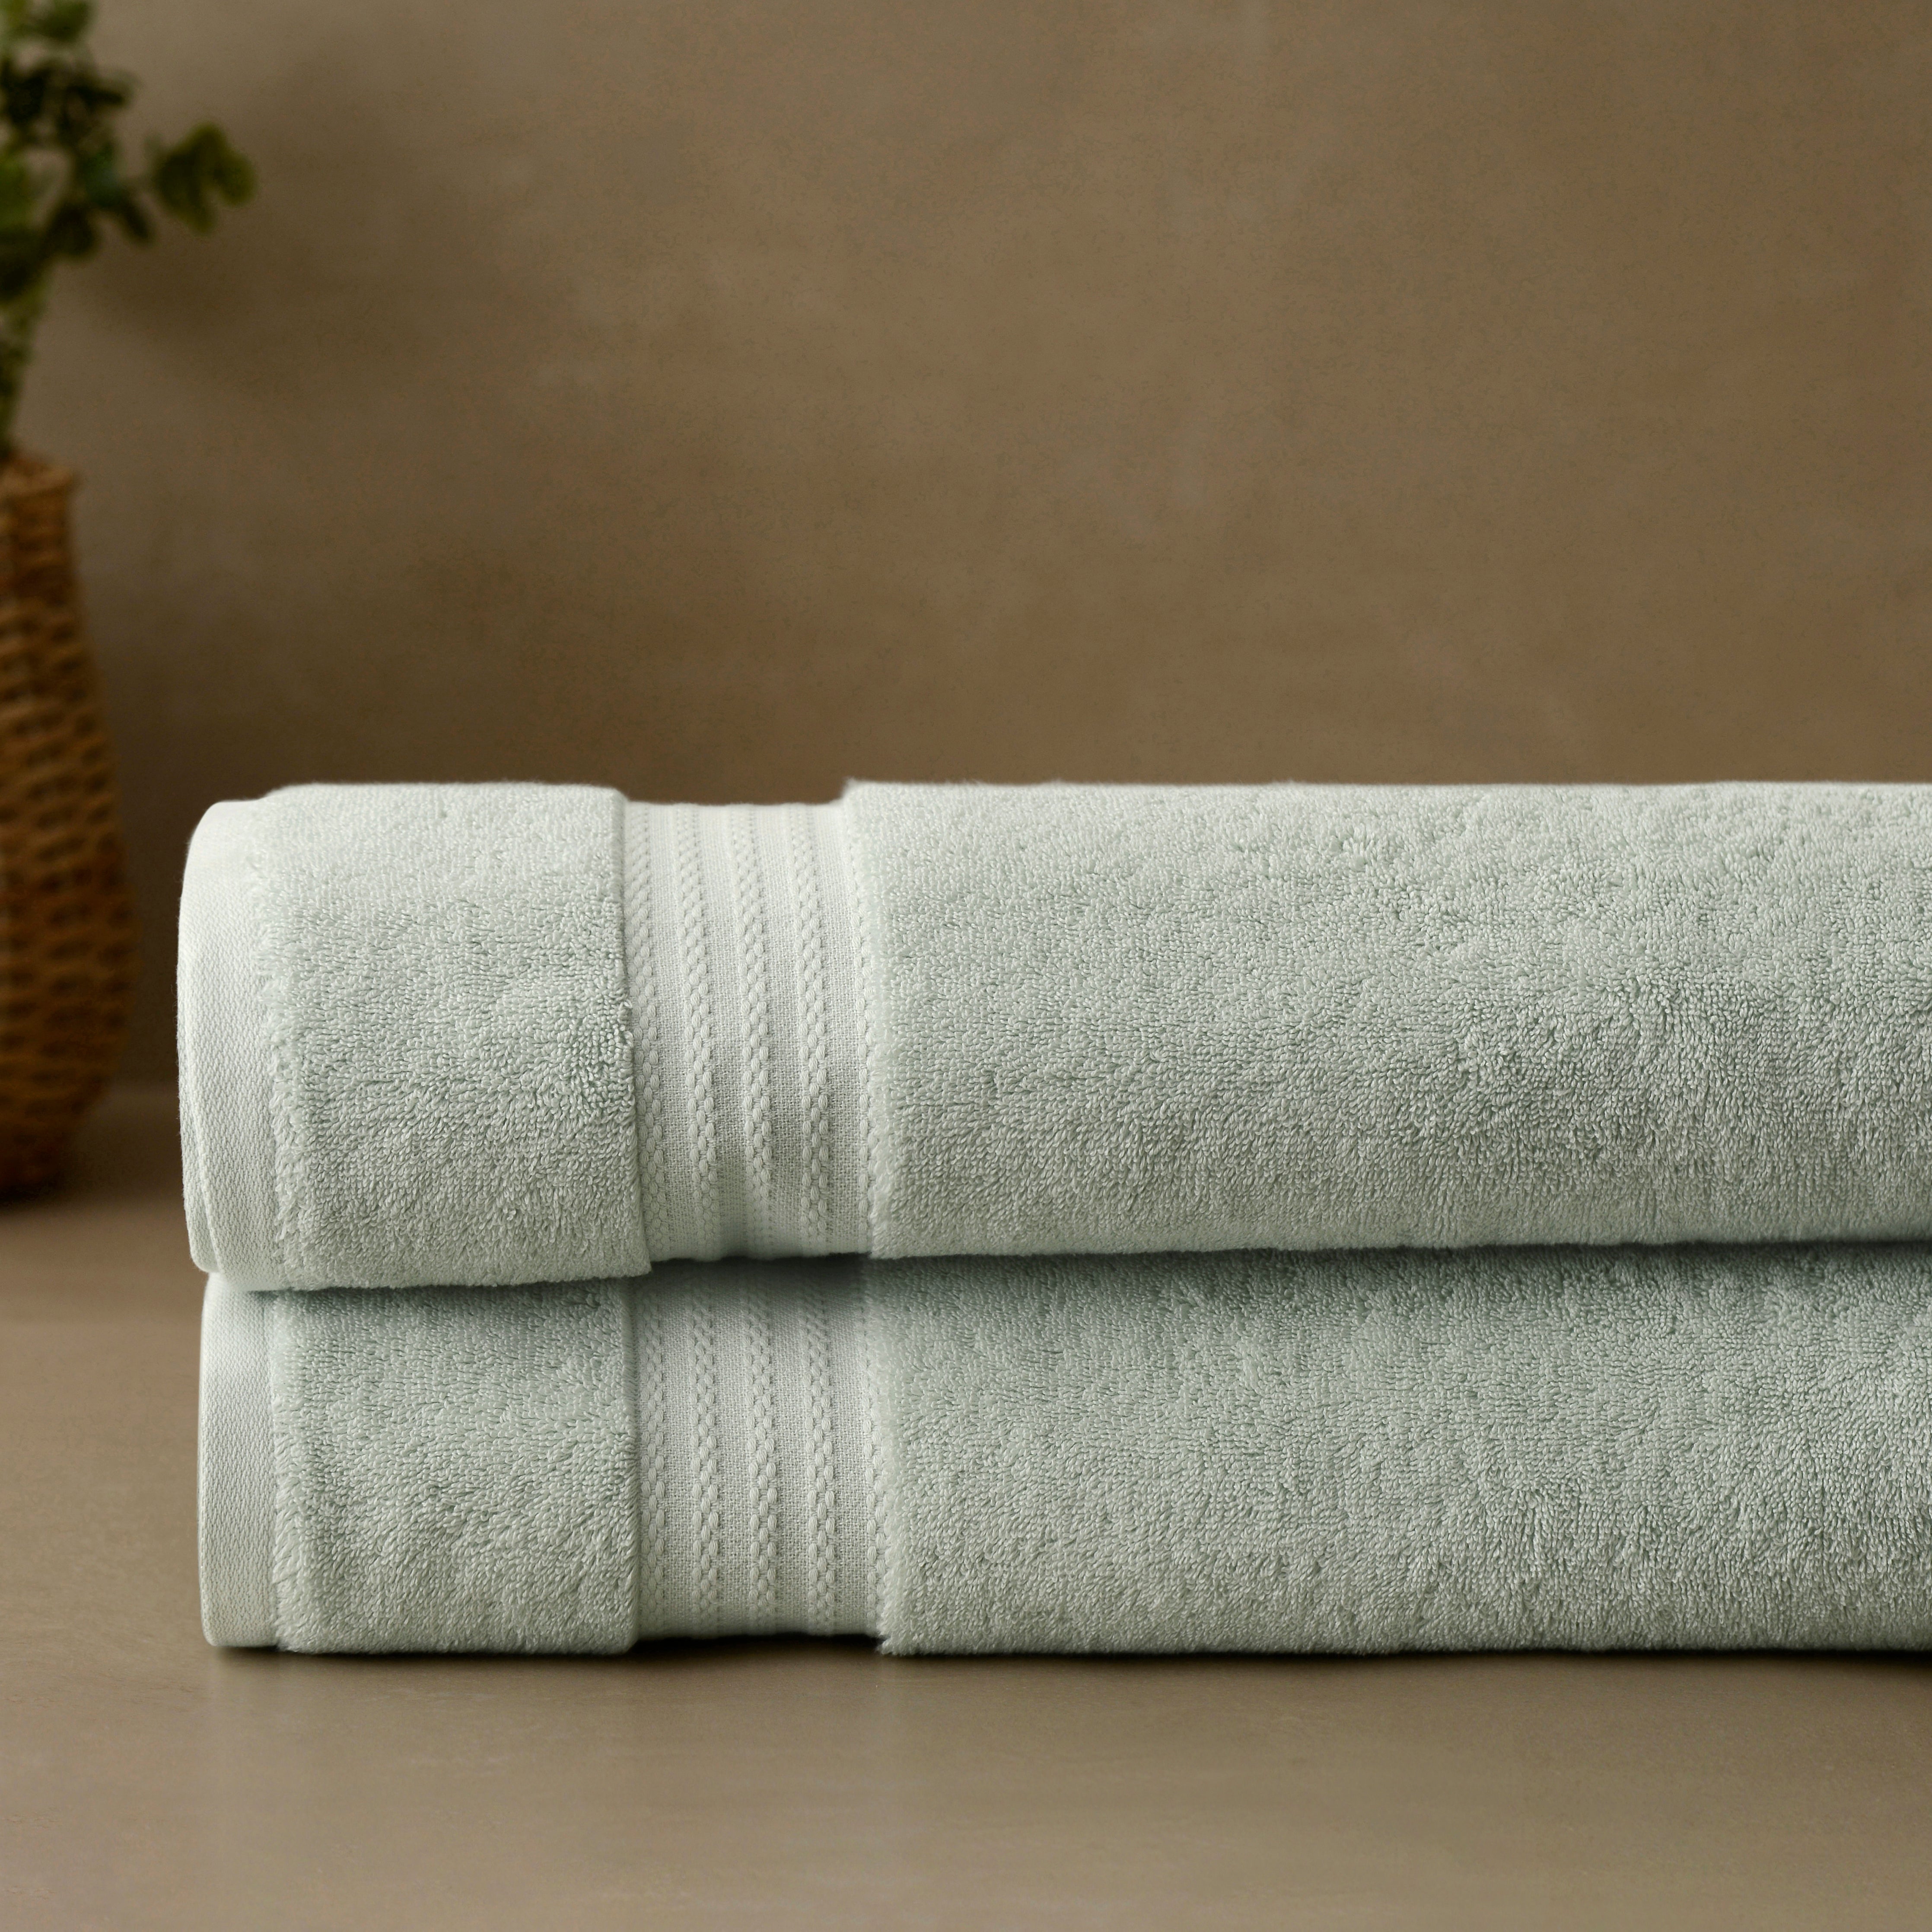 CrystalTowels 7-Pack Bath Towels - Extra-Absorbent - 100% Cotton